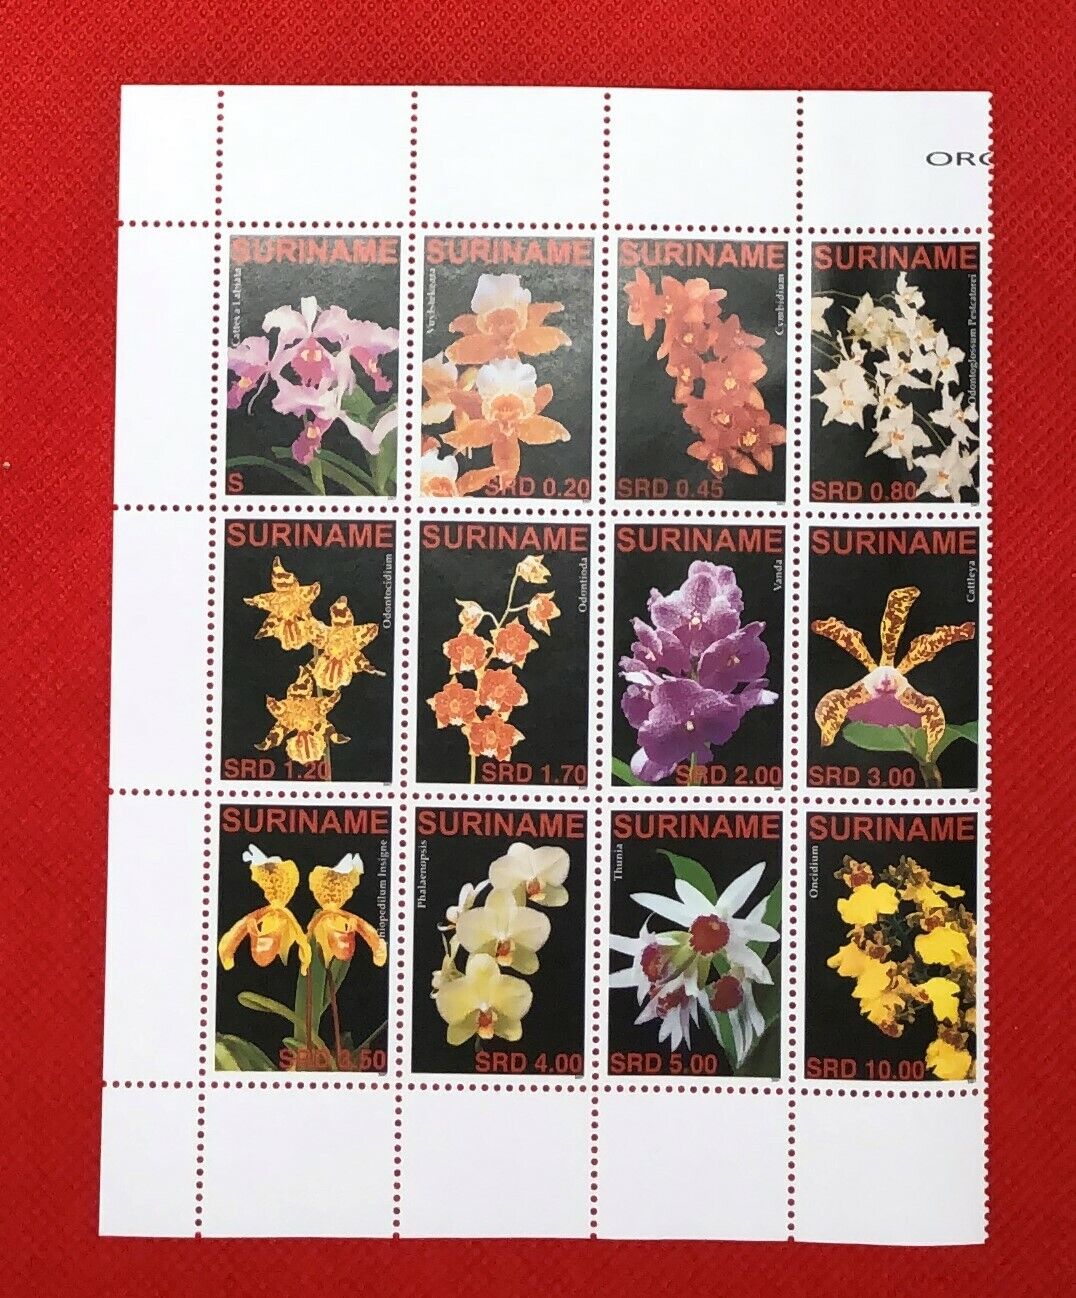 Ranking TOP5 2007 Suriname 1351 Super beauty product restock quality top MNH block of ORCHIDS 12 - FLOWERS scarce